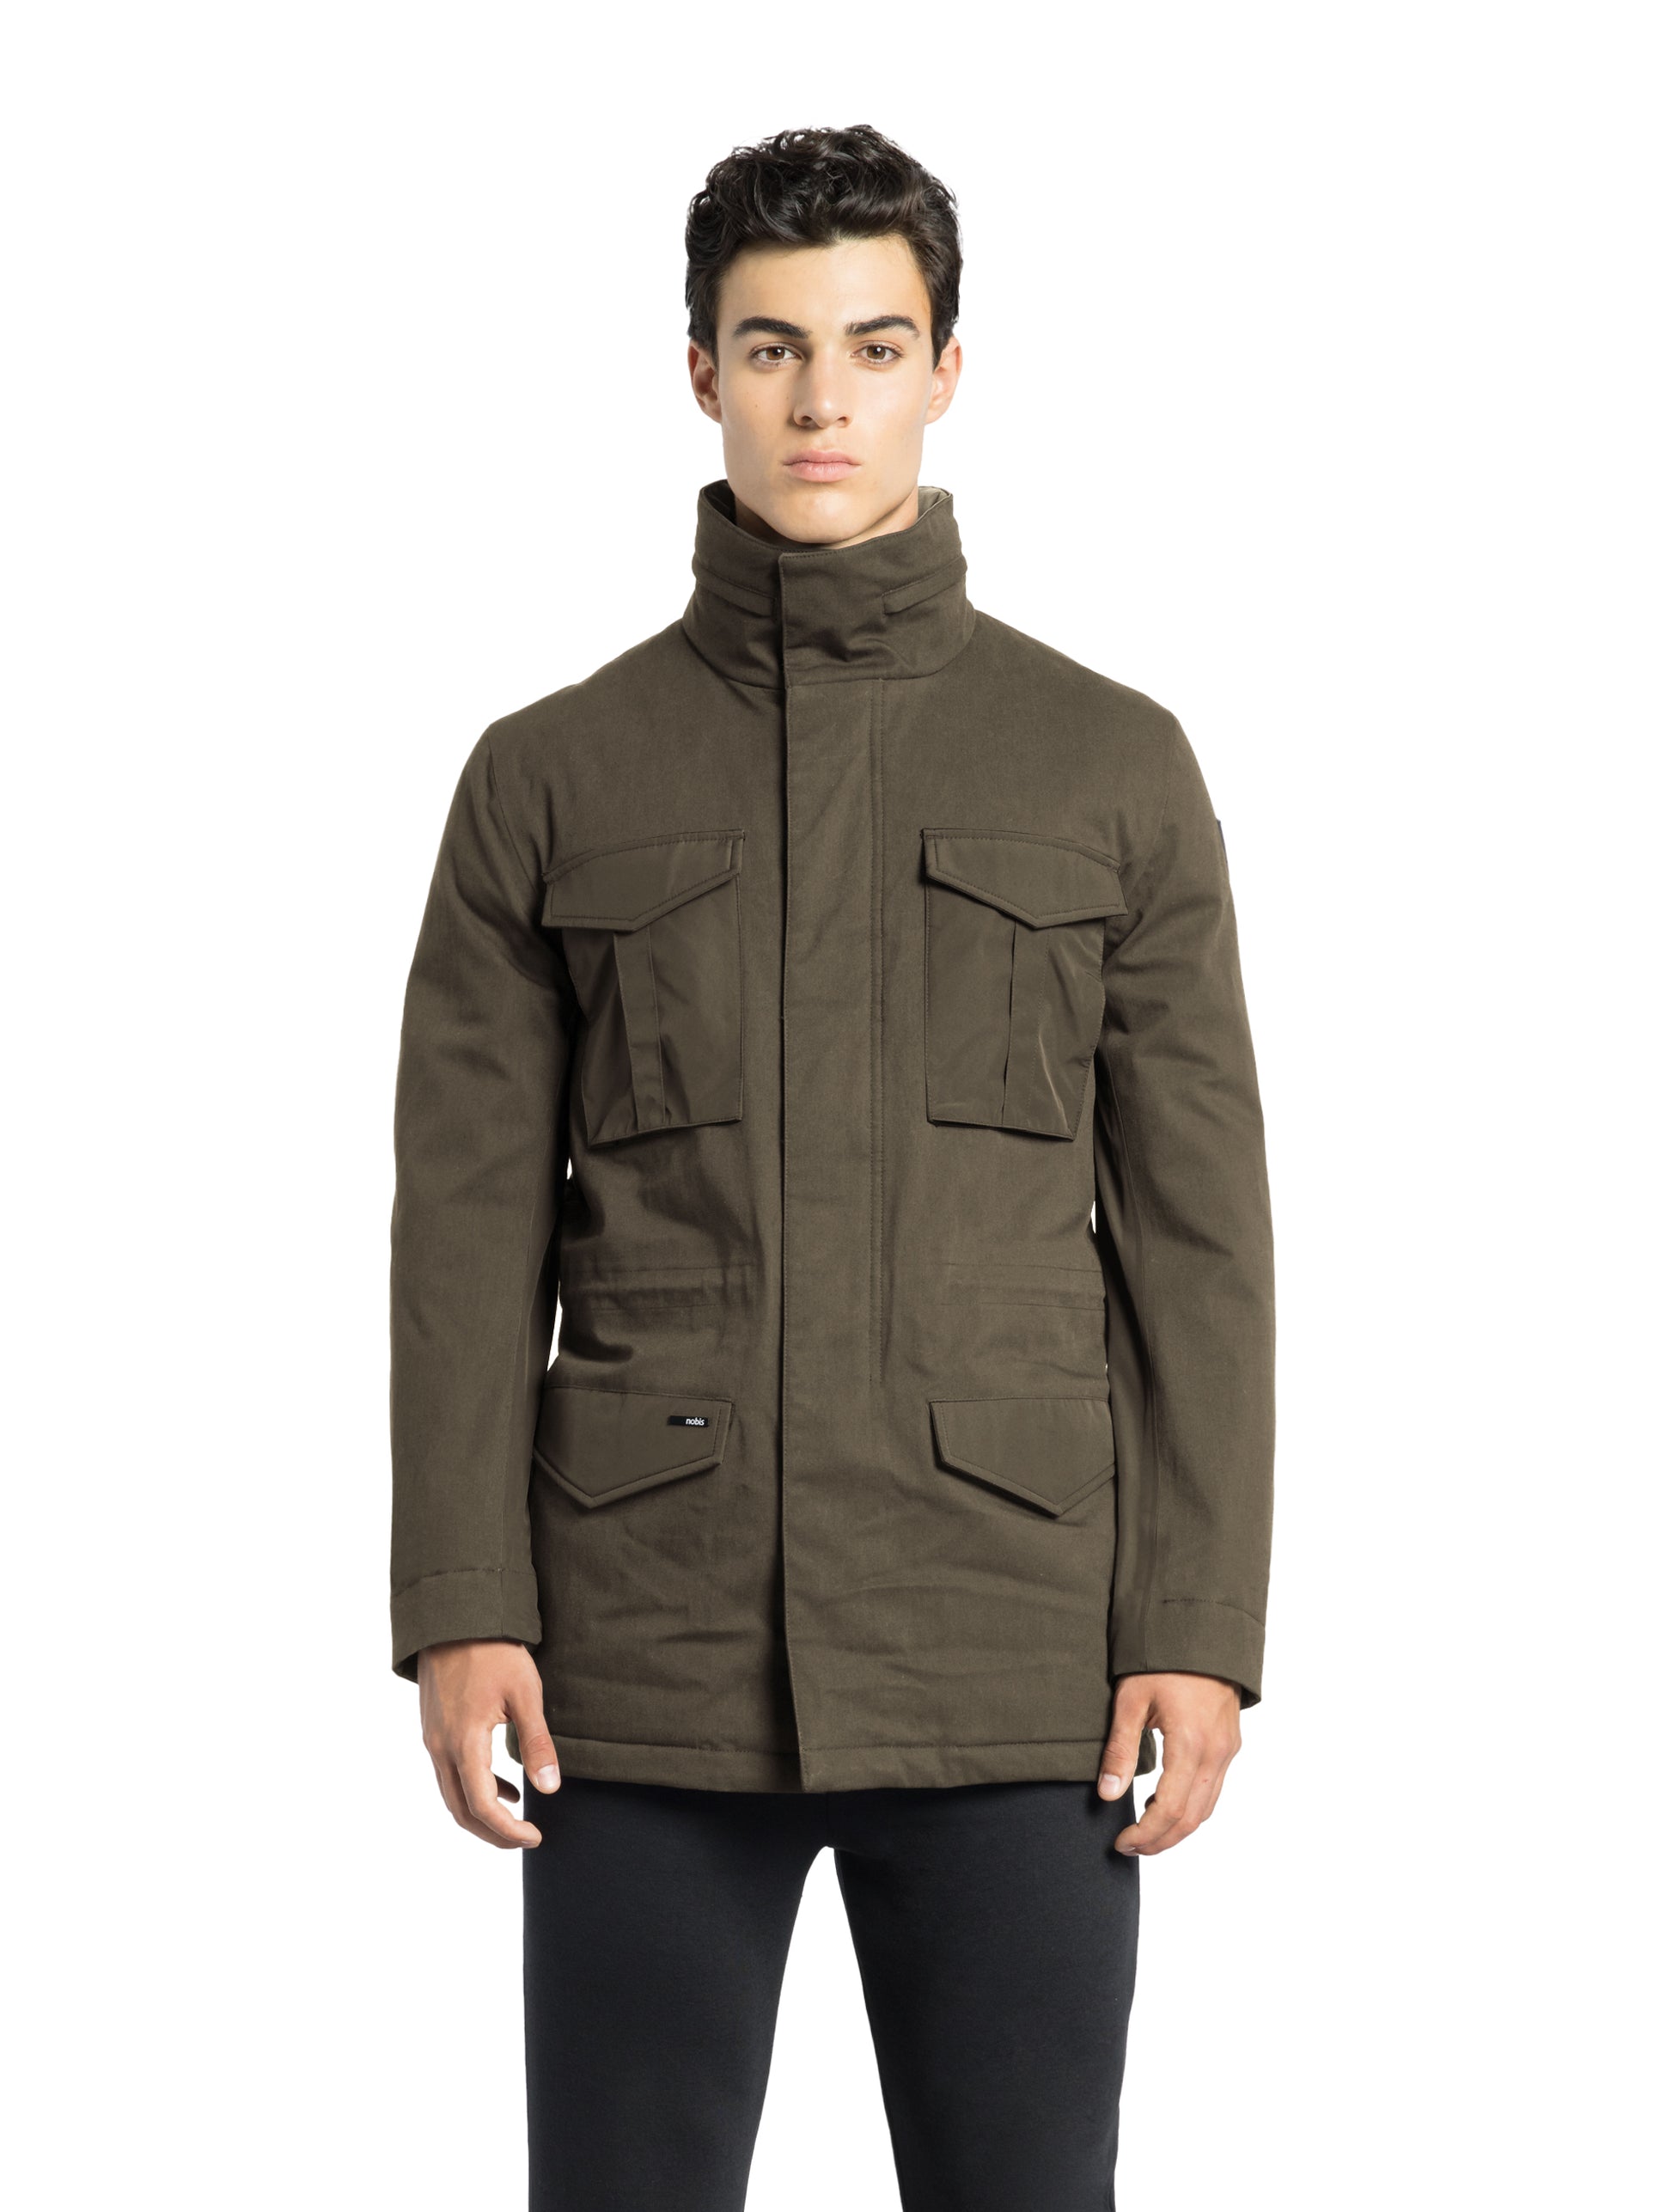 Pelican Men's Tailored Field Jacket in hip length, premium cotton blend and 3-ply micro denier fabrication, Premium Canadian origin White Duck Down insulation, tuck away, waterproof hood in premium cire technical nylon taffeta, two-way centre-front zipper with magnetic wind flap, pit zipper vents, magnetic closure chest and waist flap pockets, hidden adjustable waist drawcord, and action back detailing, in Fatigue